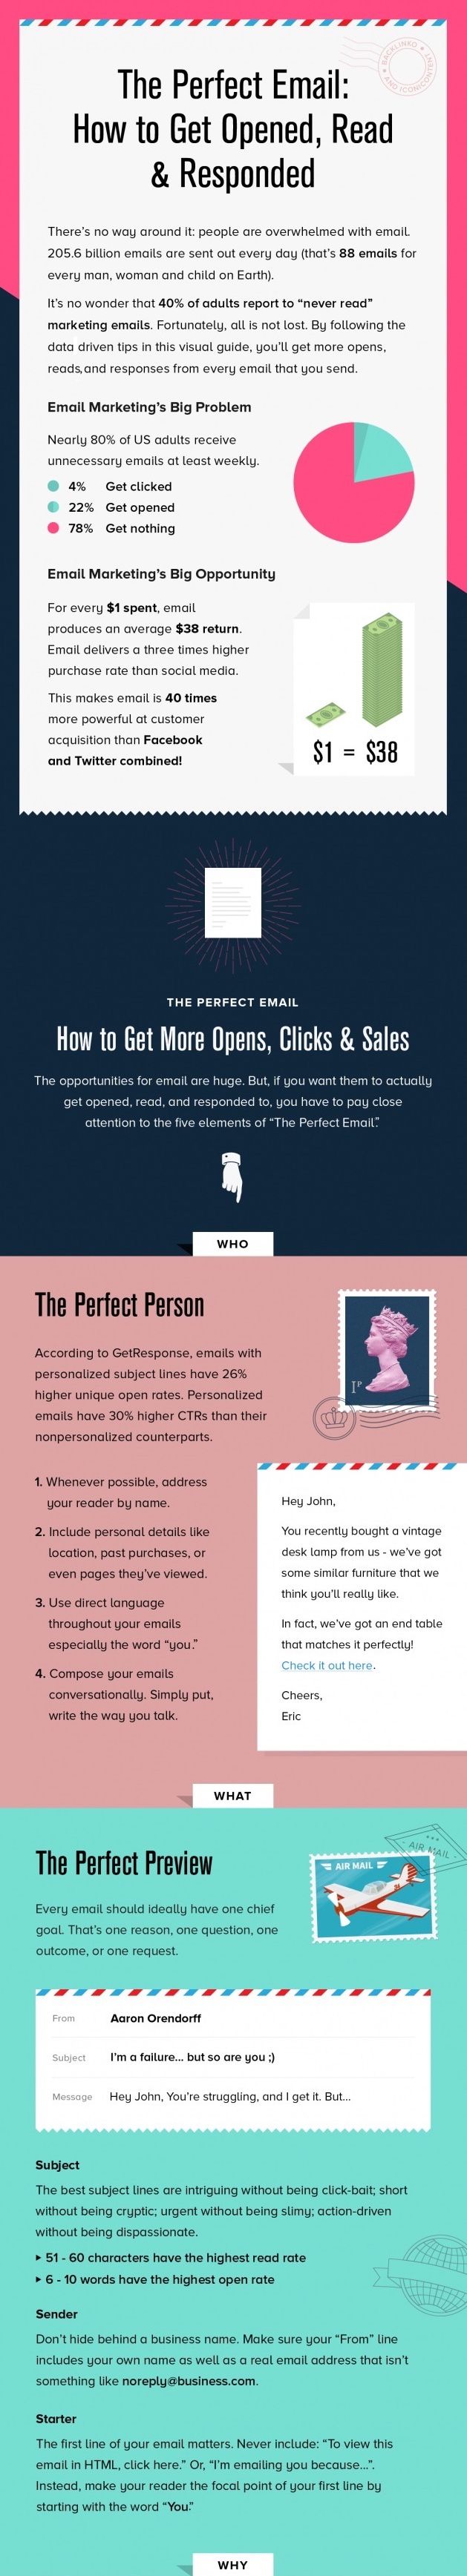 160920 writing the perfect email infographic  1  copy